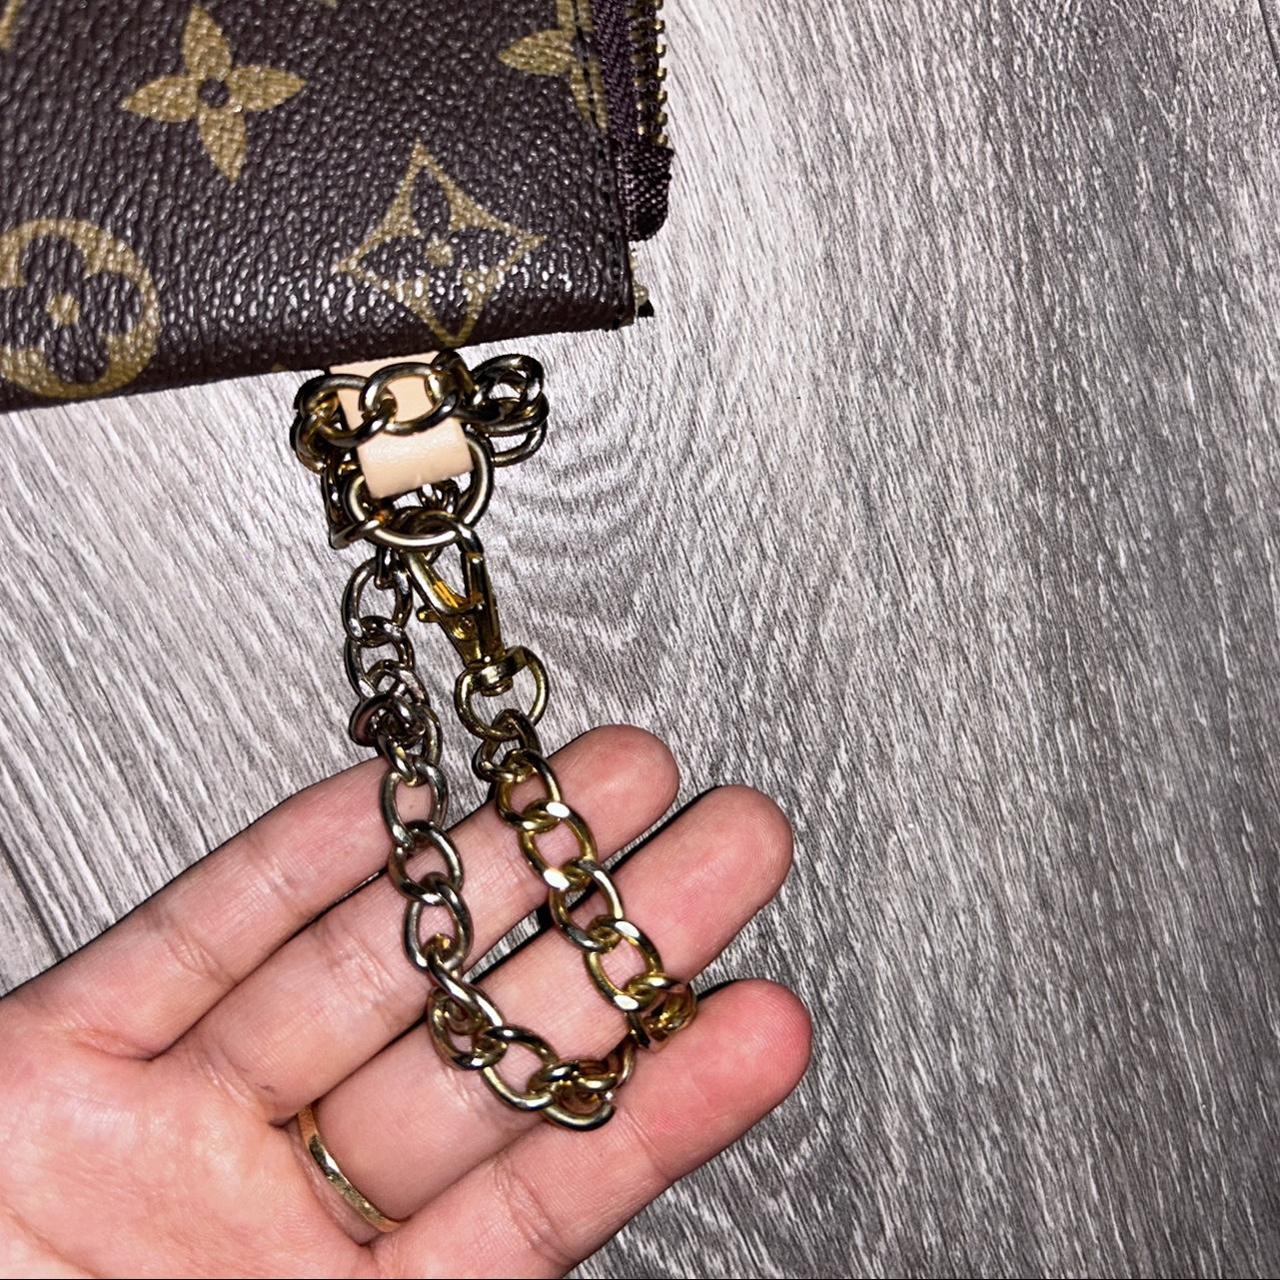 Louis Vuitton car/cash holder Came in my bag and I - Depop